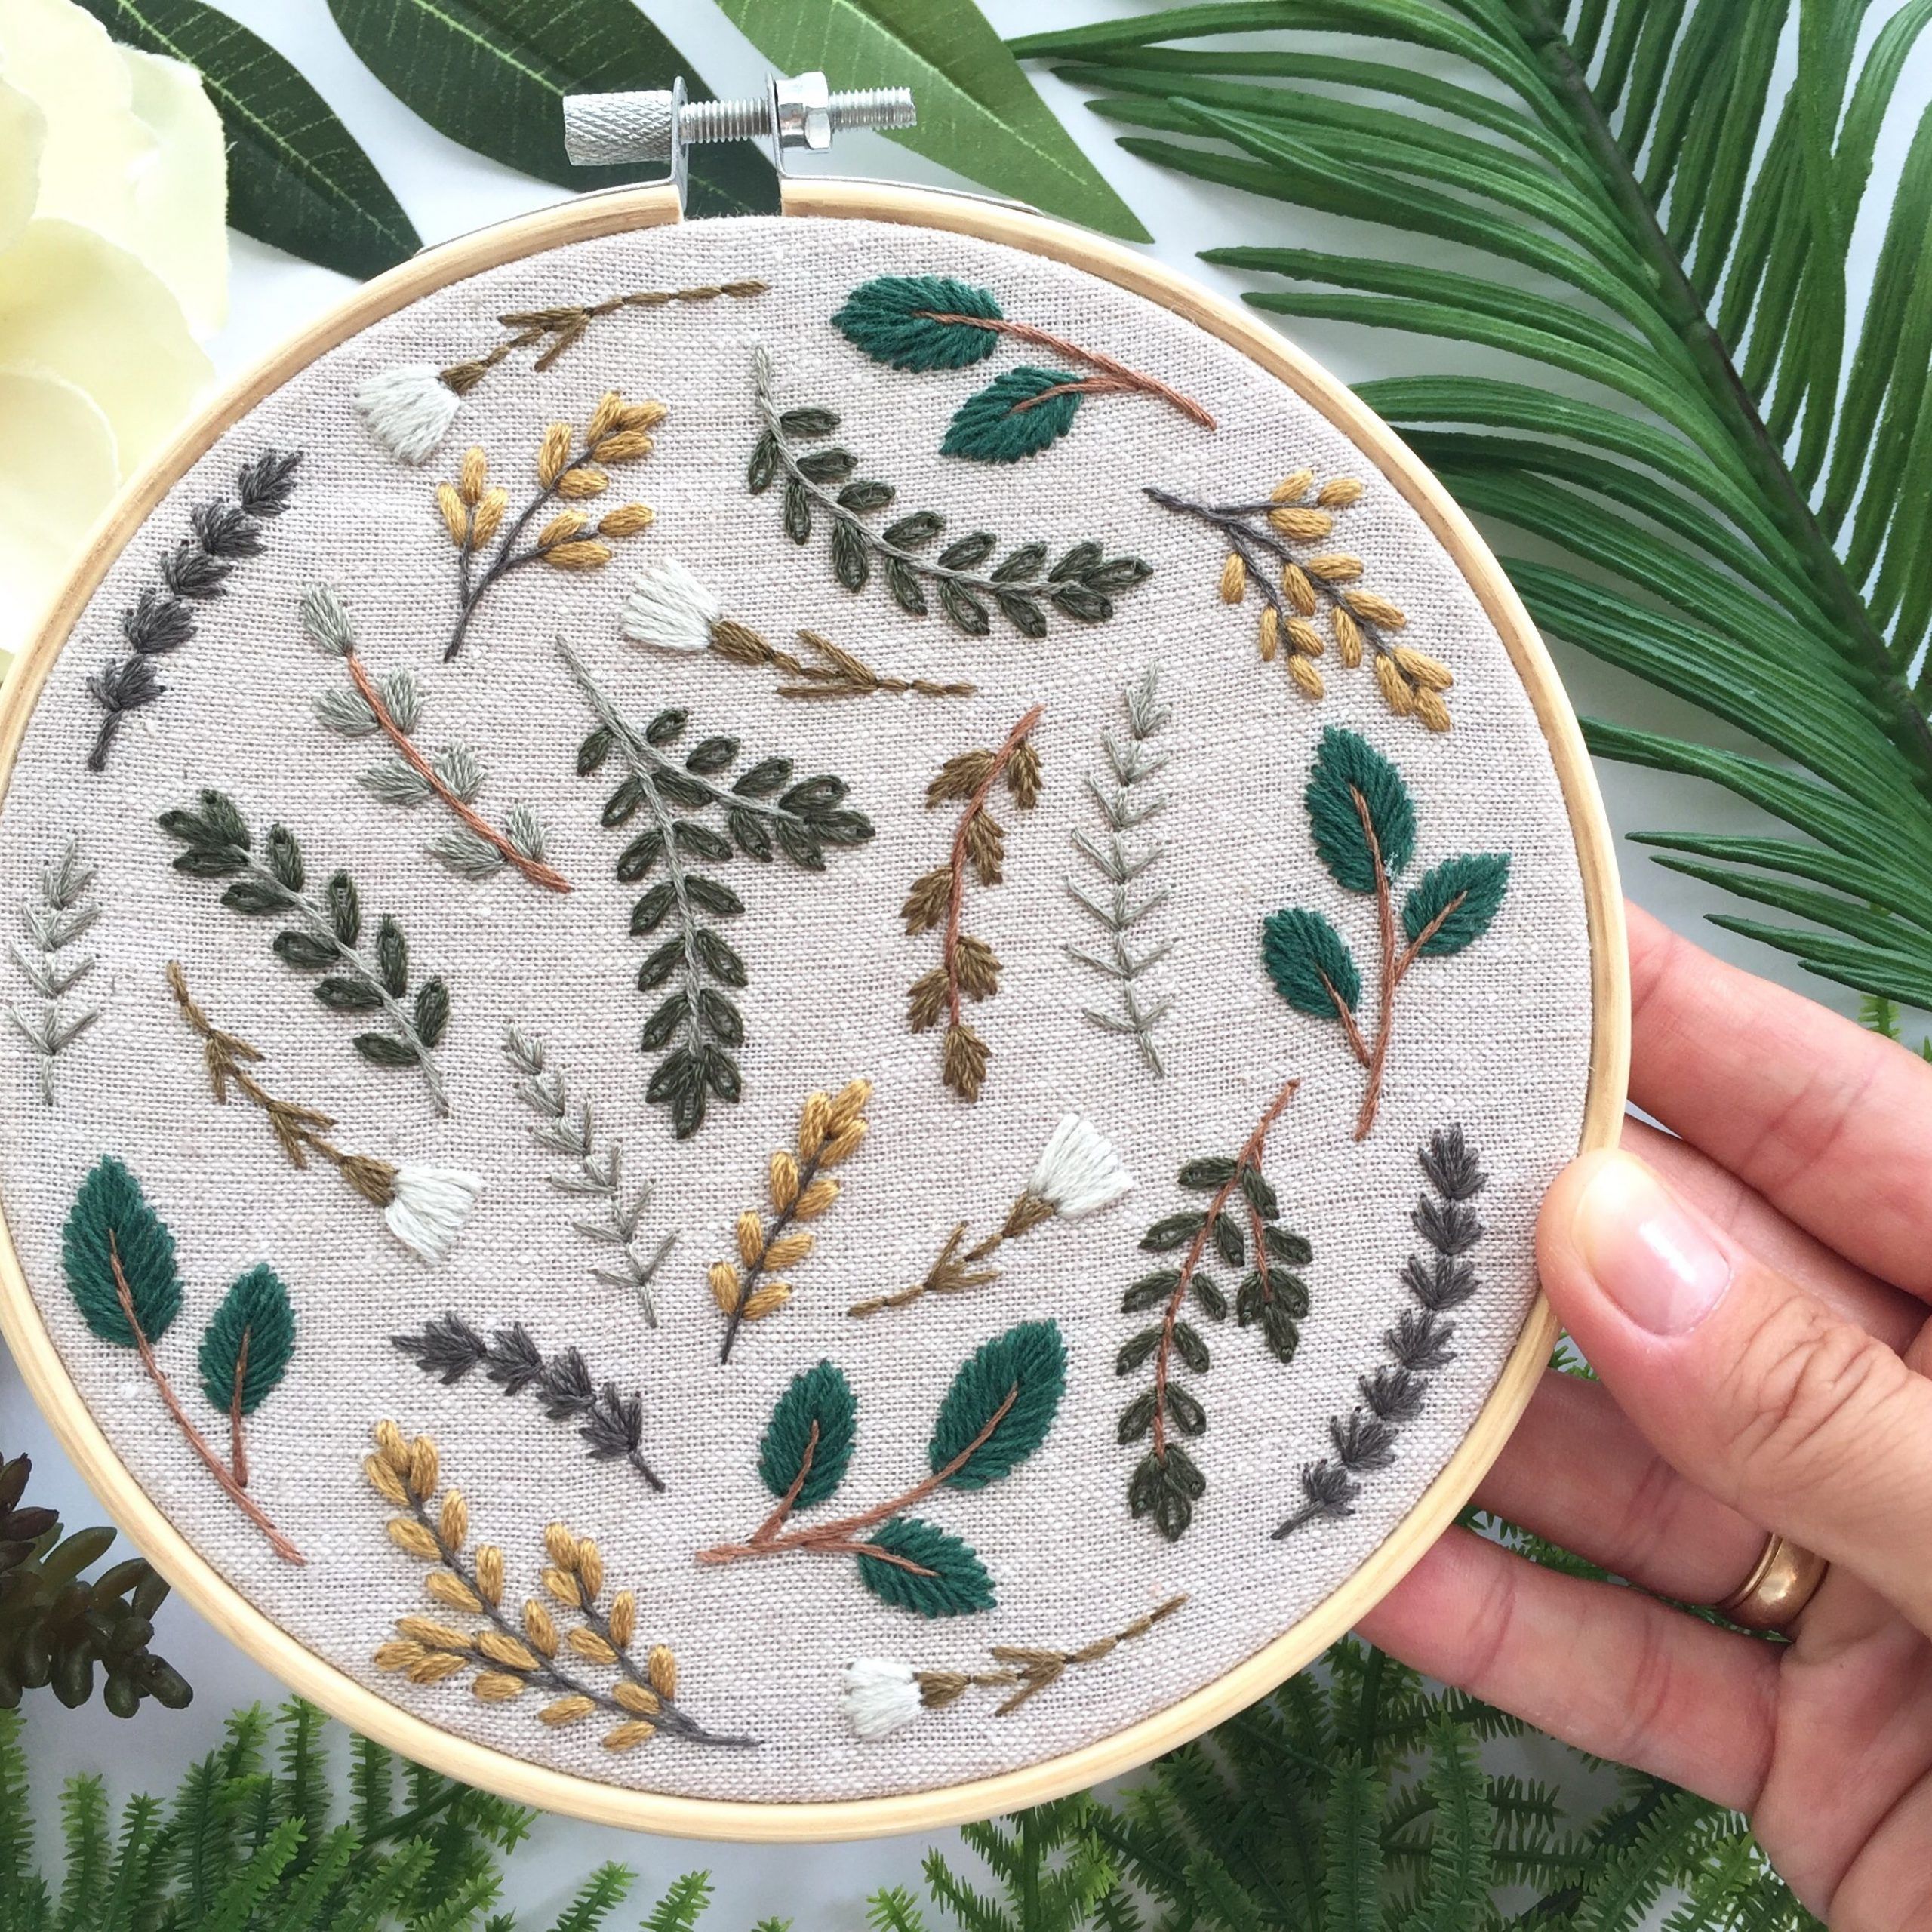 Most Recently Released Blended Fabric Leaves Wall Hangings Intended For Botanical Embroidery Hoop, Cross Stitch Leaves And Flowers (View 17 of 20)